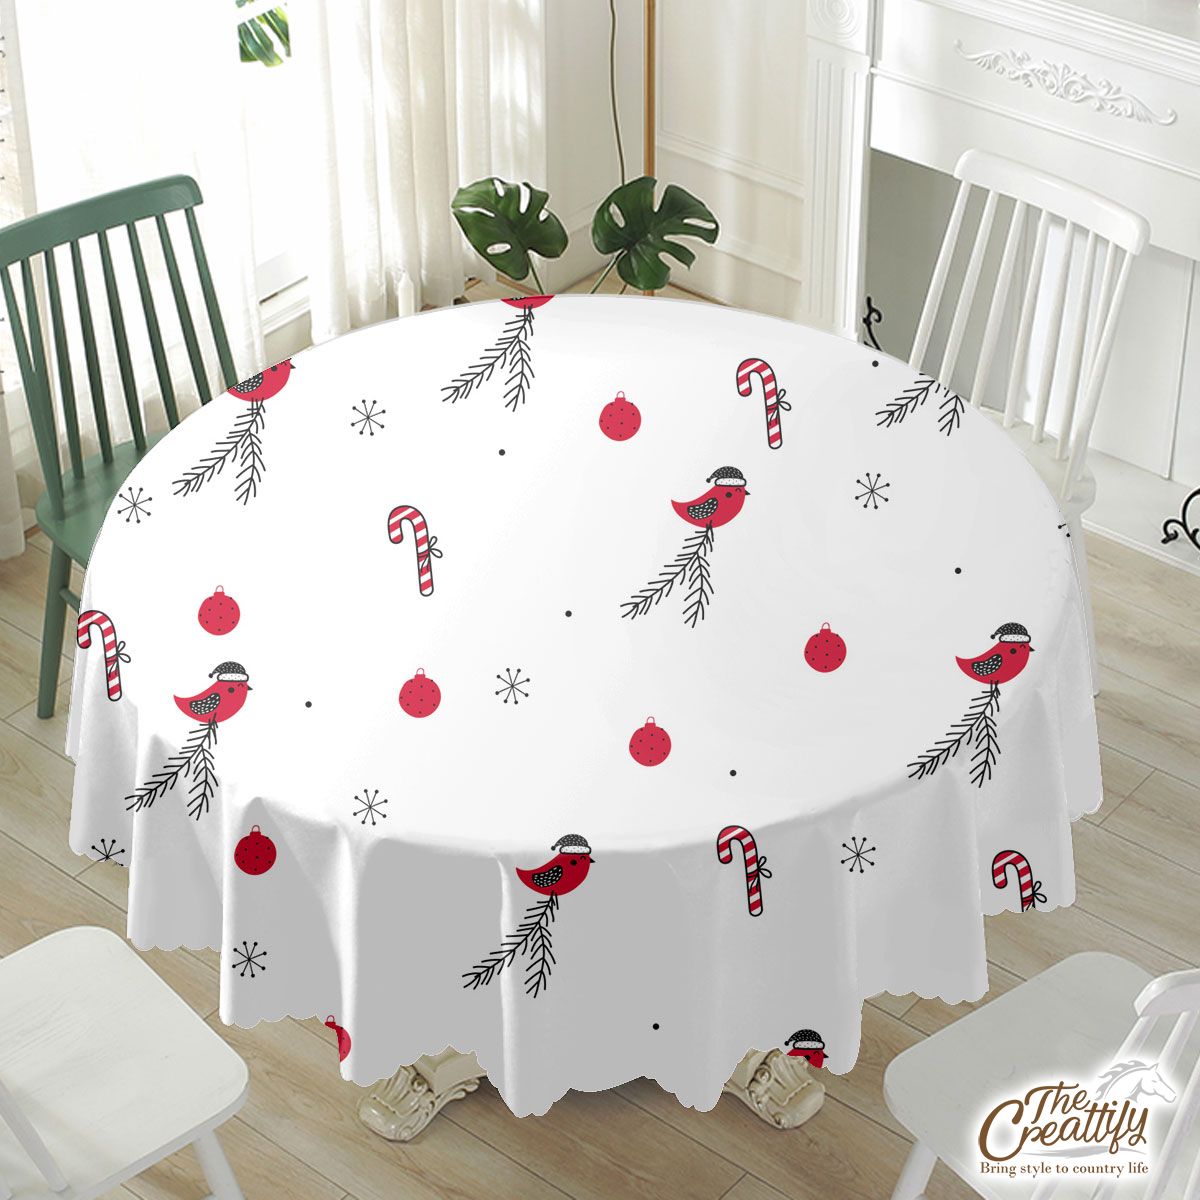 Cardinal Bird With Santa Hat, Candy Canes, Christmas Balls And Snowflake Clipart Seamless White Pattern Waterproof Tablecloth